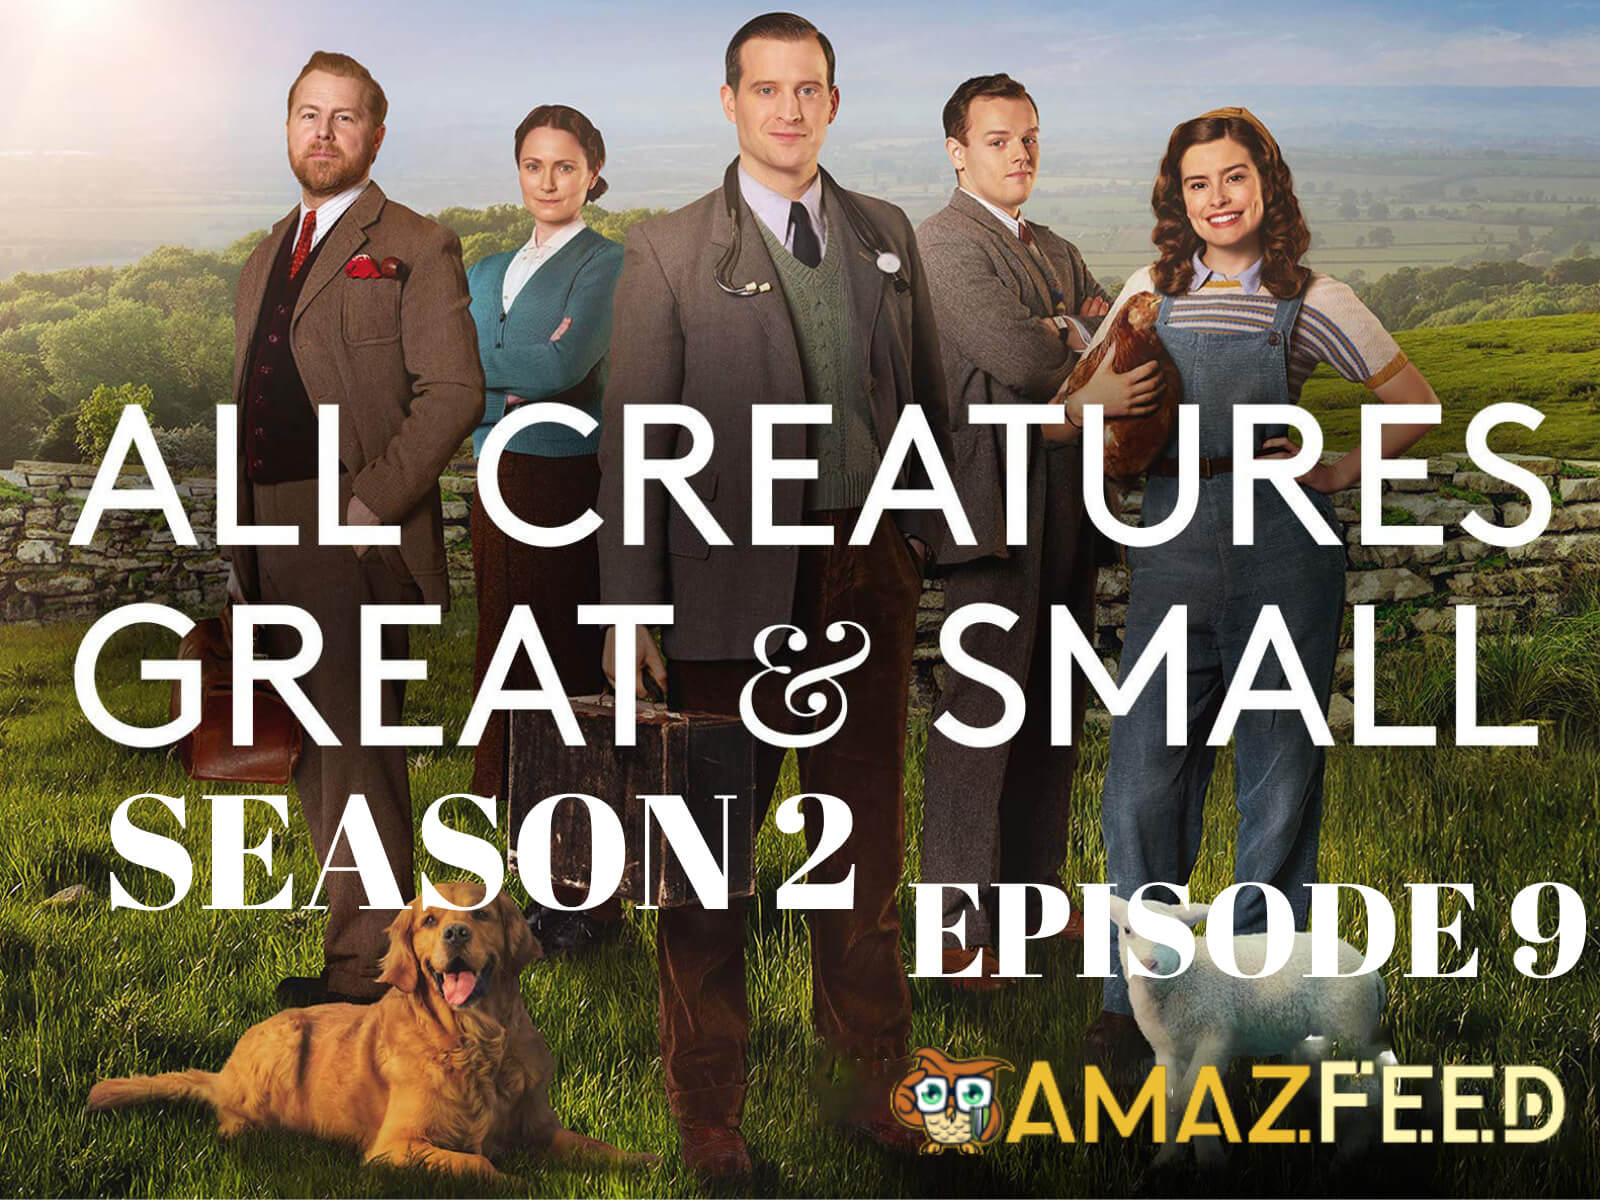 All Creatures Great and Small season 2 episode 9: Confirmed Release - All Creatures Great And Small 2020 Season 2 Release Date